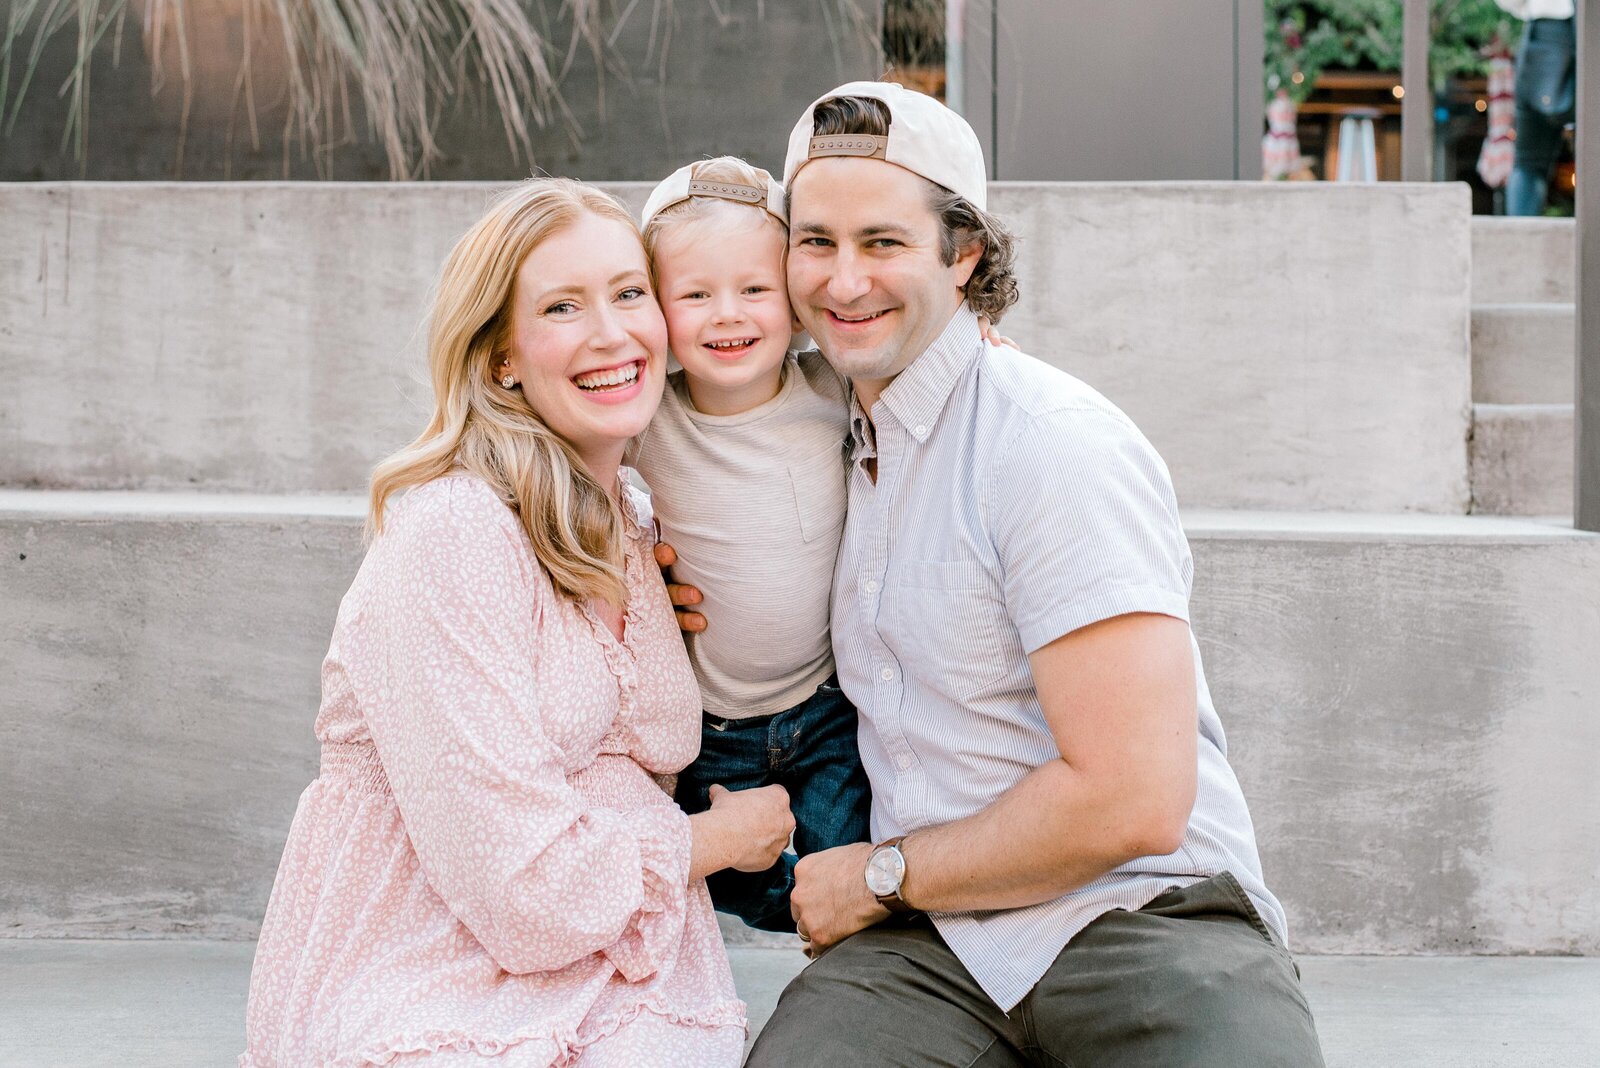 South-End-Family-Session—Uptown-Charlotte-FamilyPhotographer-North-Carolina-Photographer-Alyssa-Frost-Photography-Bright-and-Airy-Photographer--9